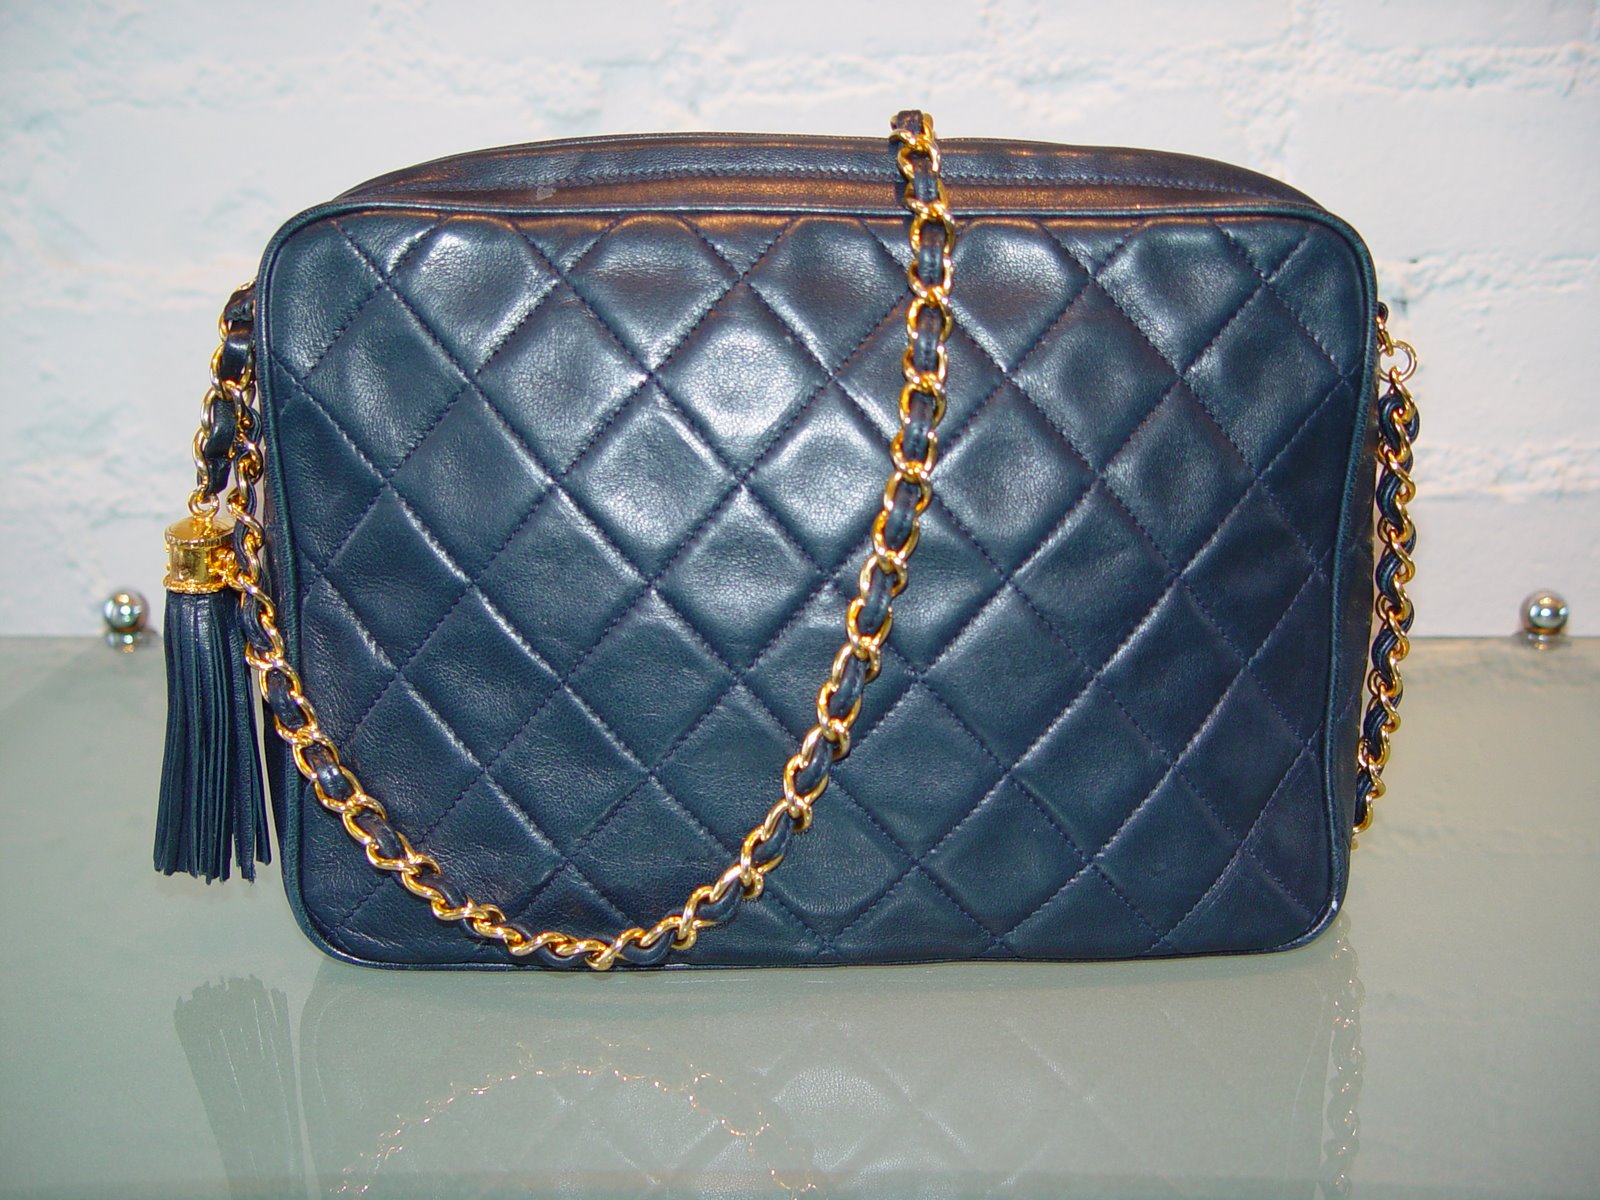 [CHANEL+CLASSIC+QUILTED+BLUE+LEATHER+SHOULDER+BAG+9+X+6+HALF+X+3+C+LATE+1980S.JPG+(2).JPG]